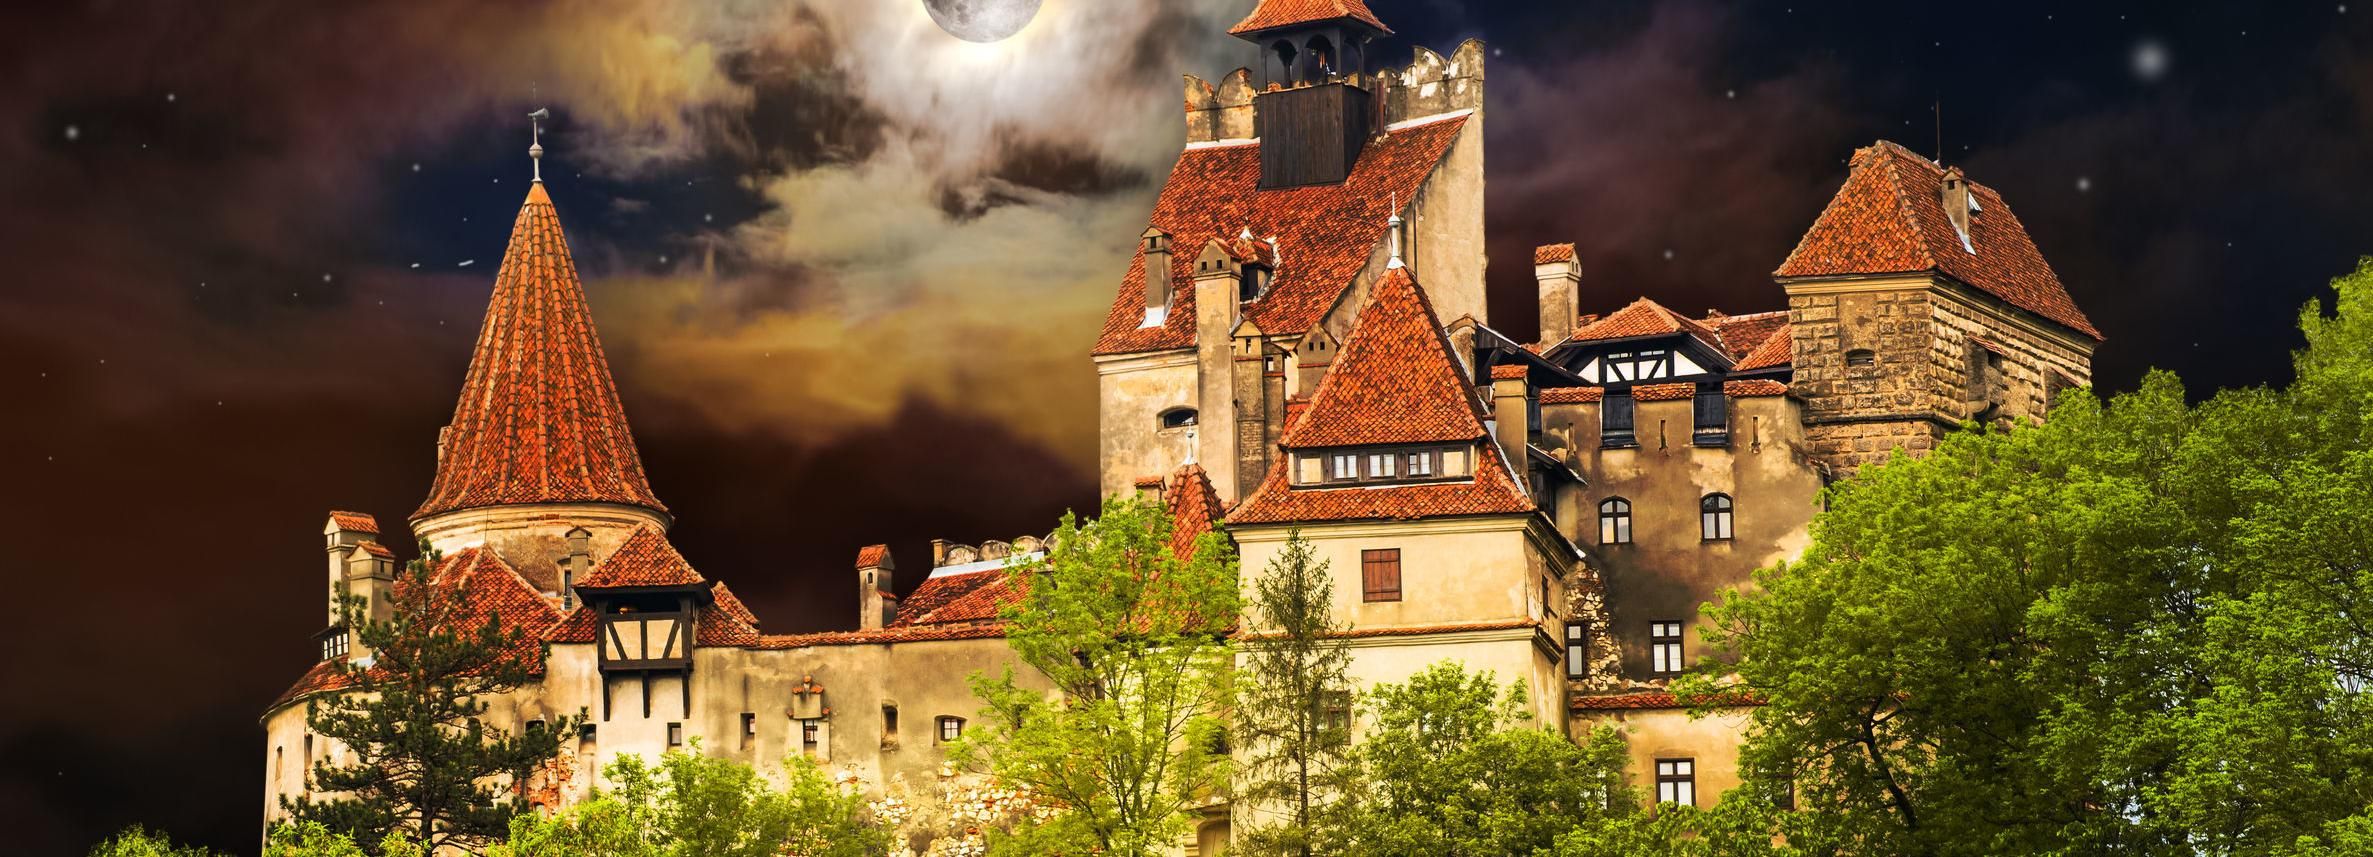 Bran Castle, - Book Tickets & Tours | GetYourGuide.com